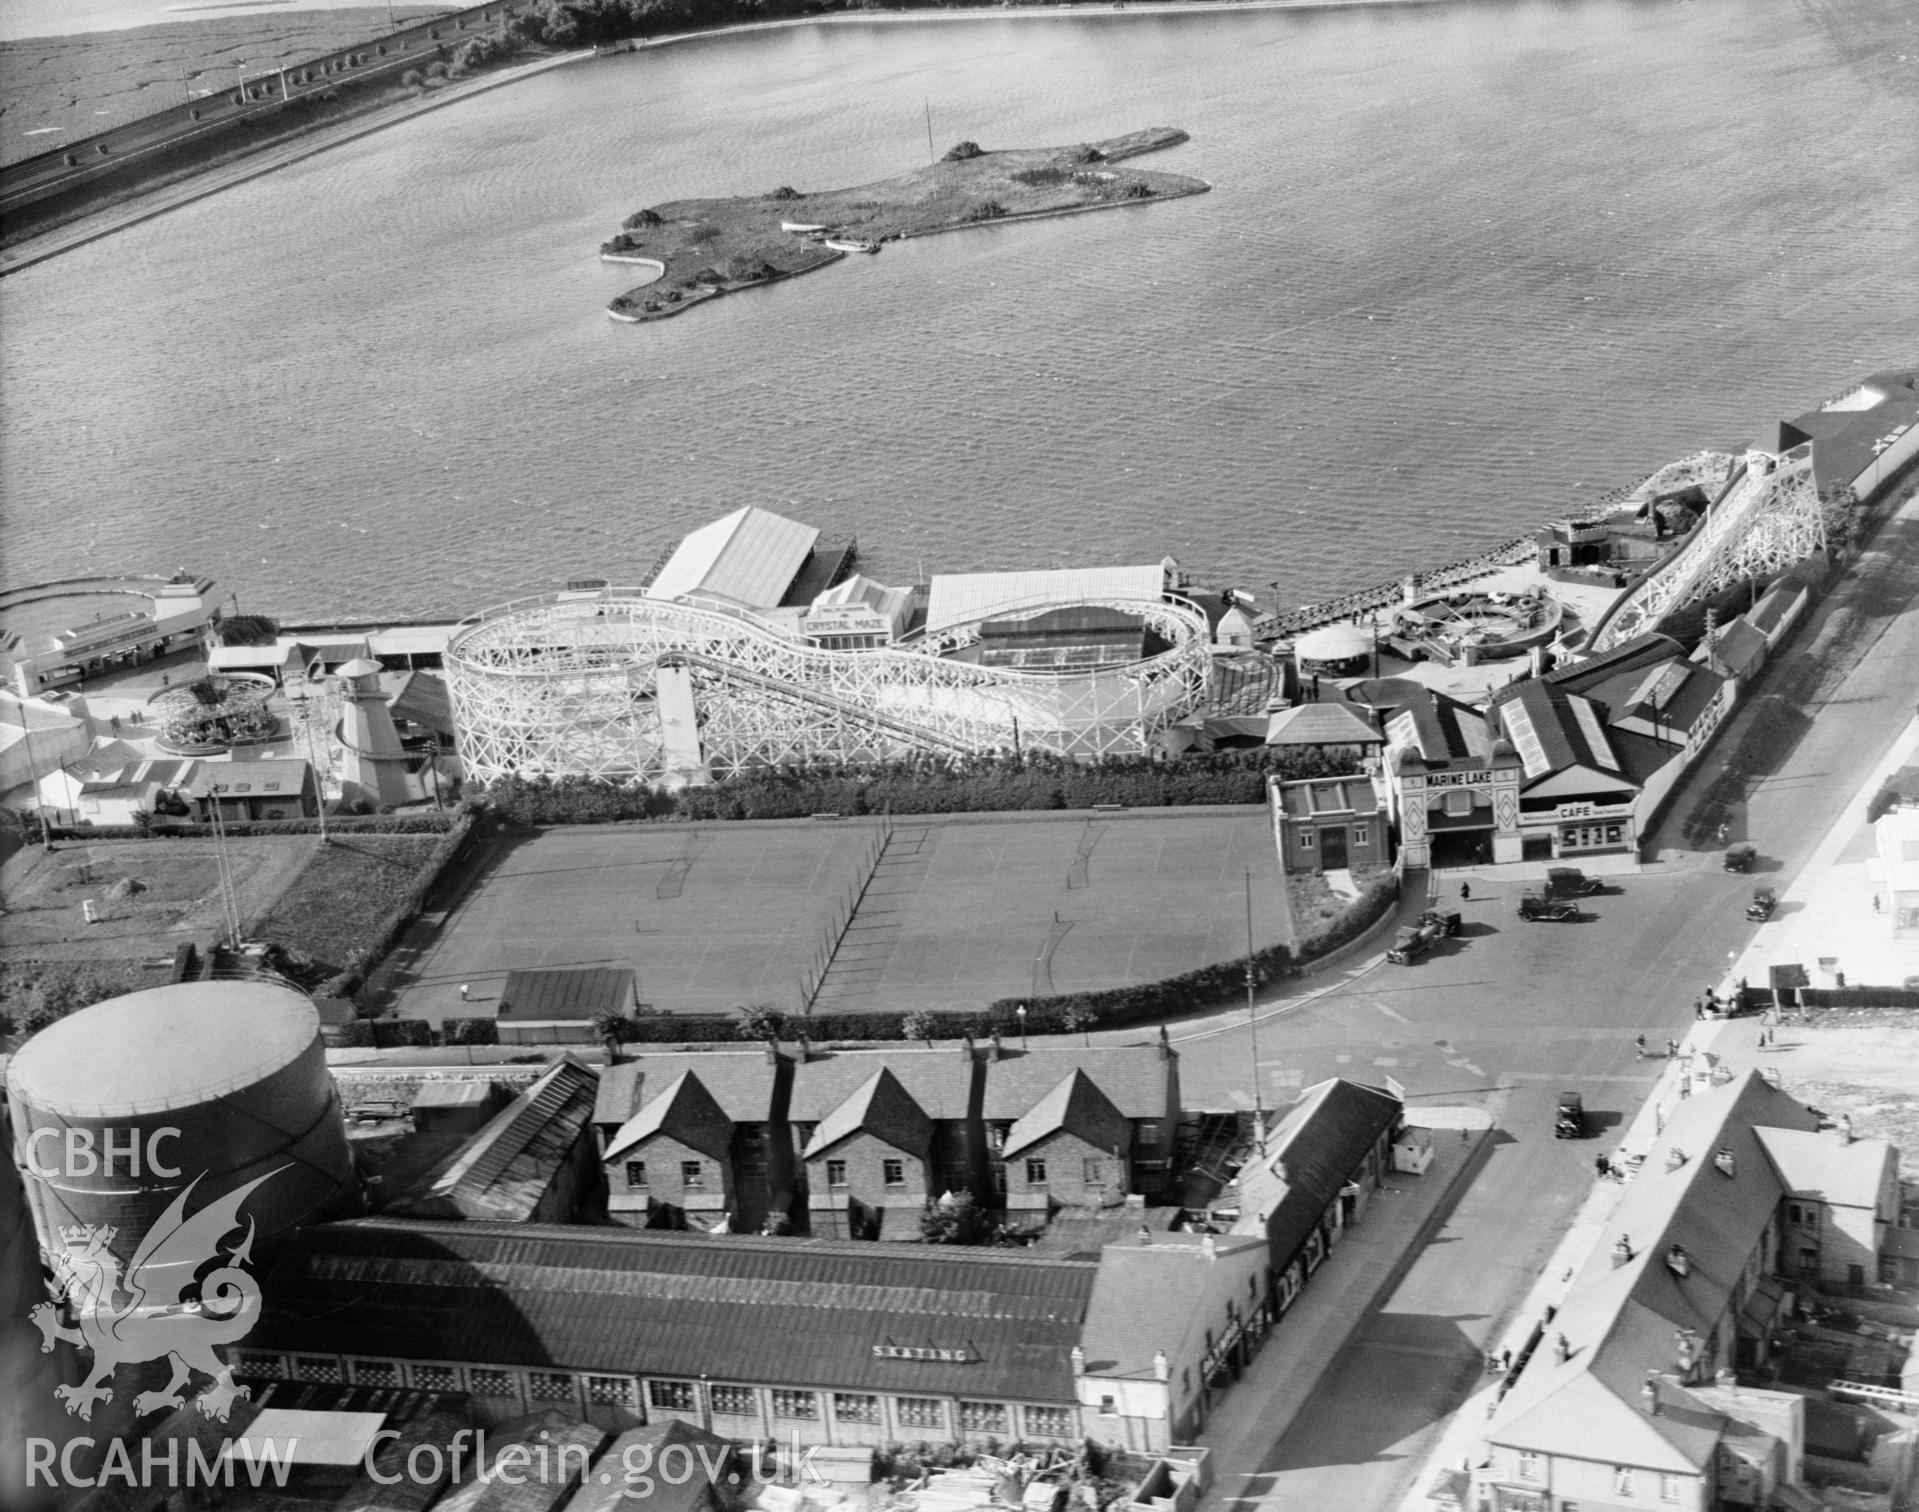 View of Rhyl showing the Marine Lake and funfair, oblique aerial view. 5?x4? black and white glass plate negative.